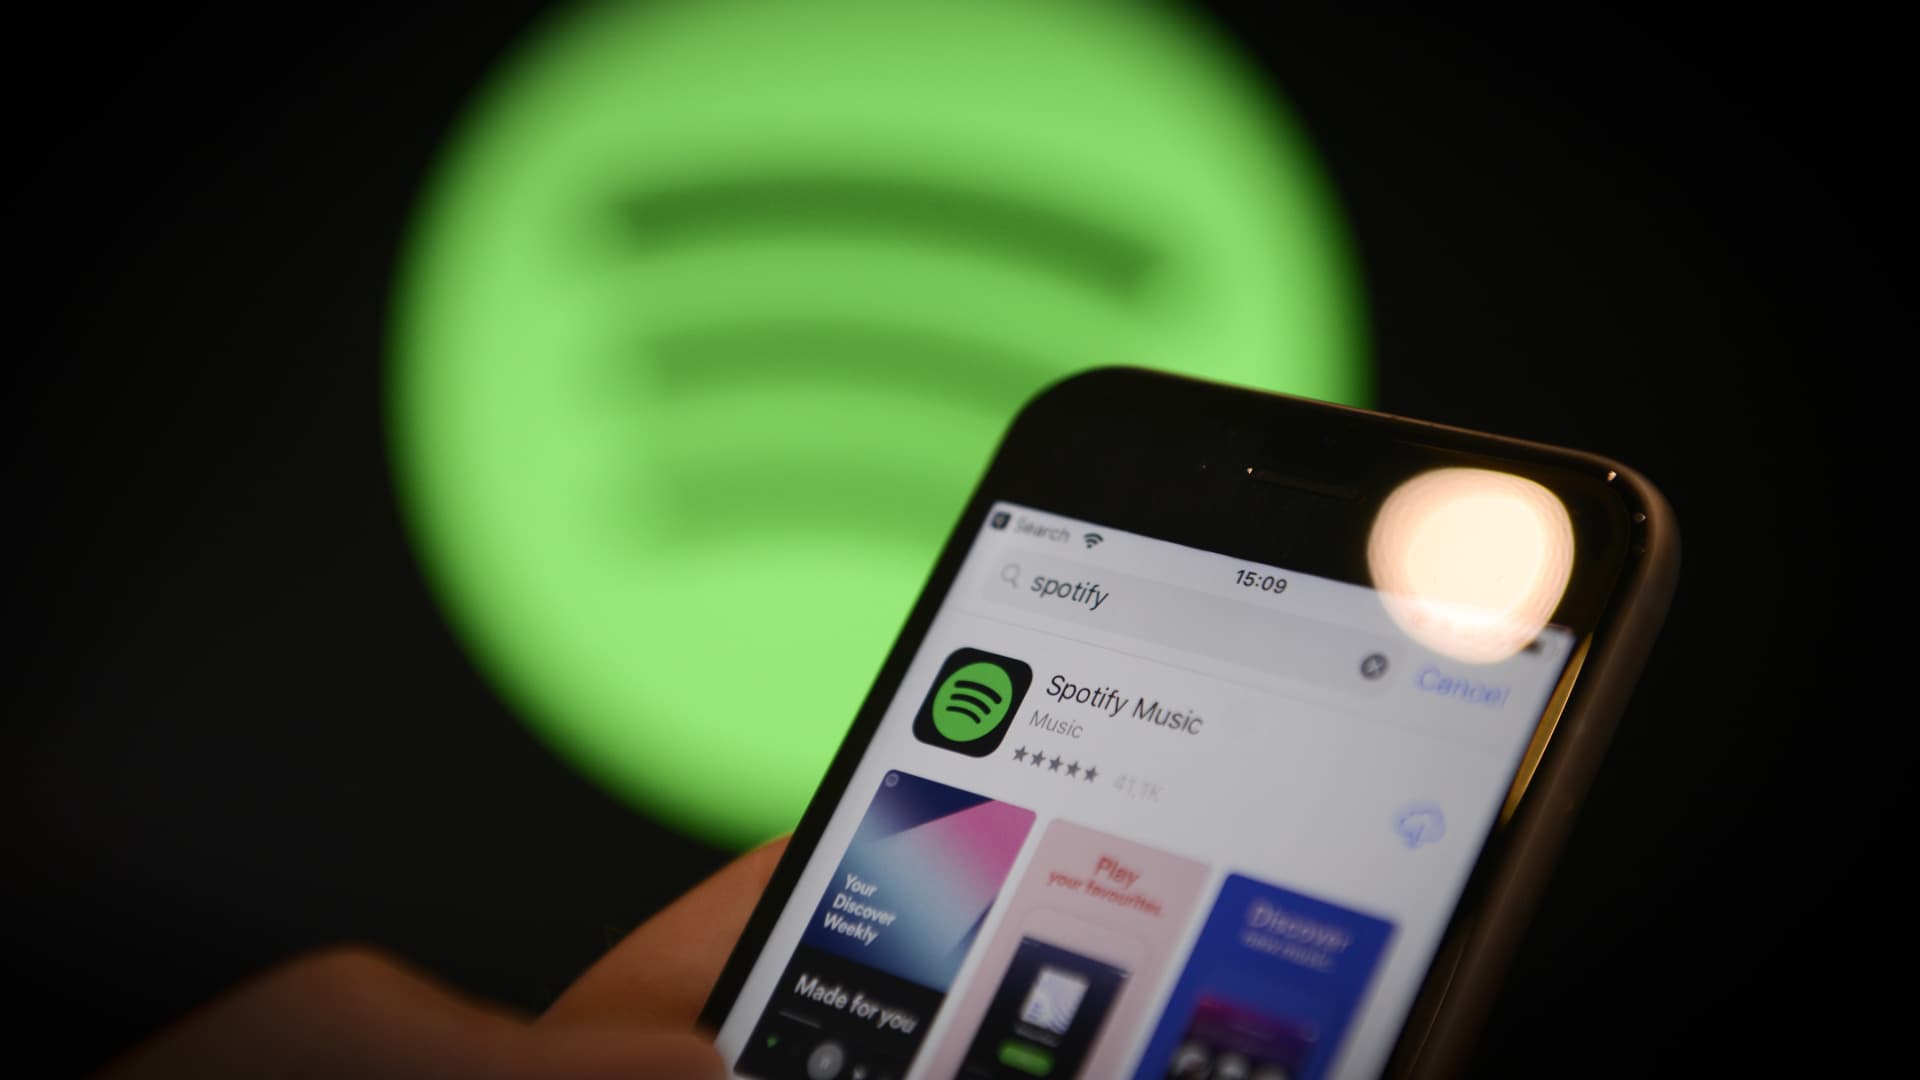 Spotify pulls out of Russia citing new laws restricting free expression